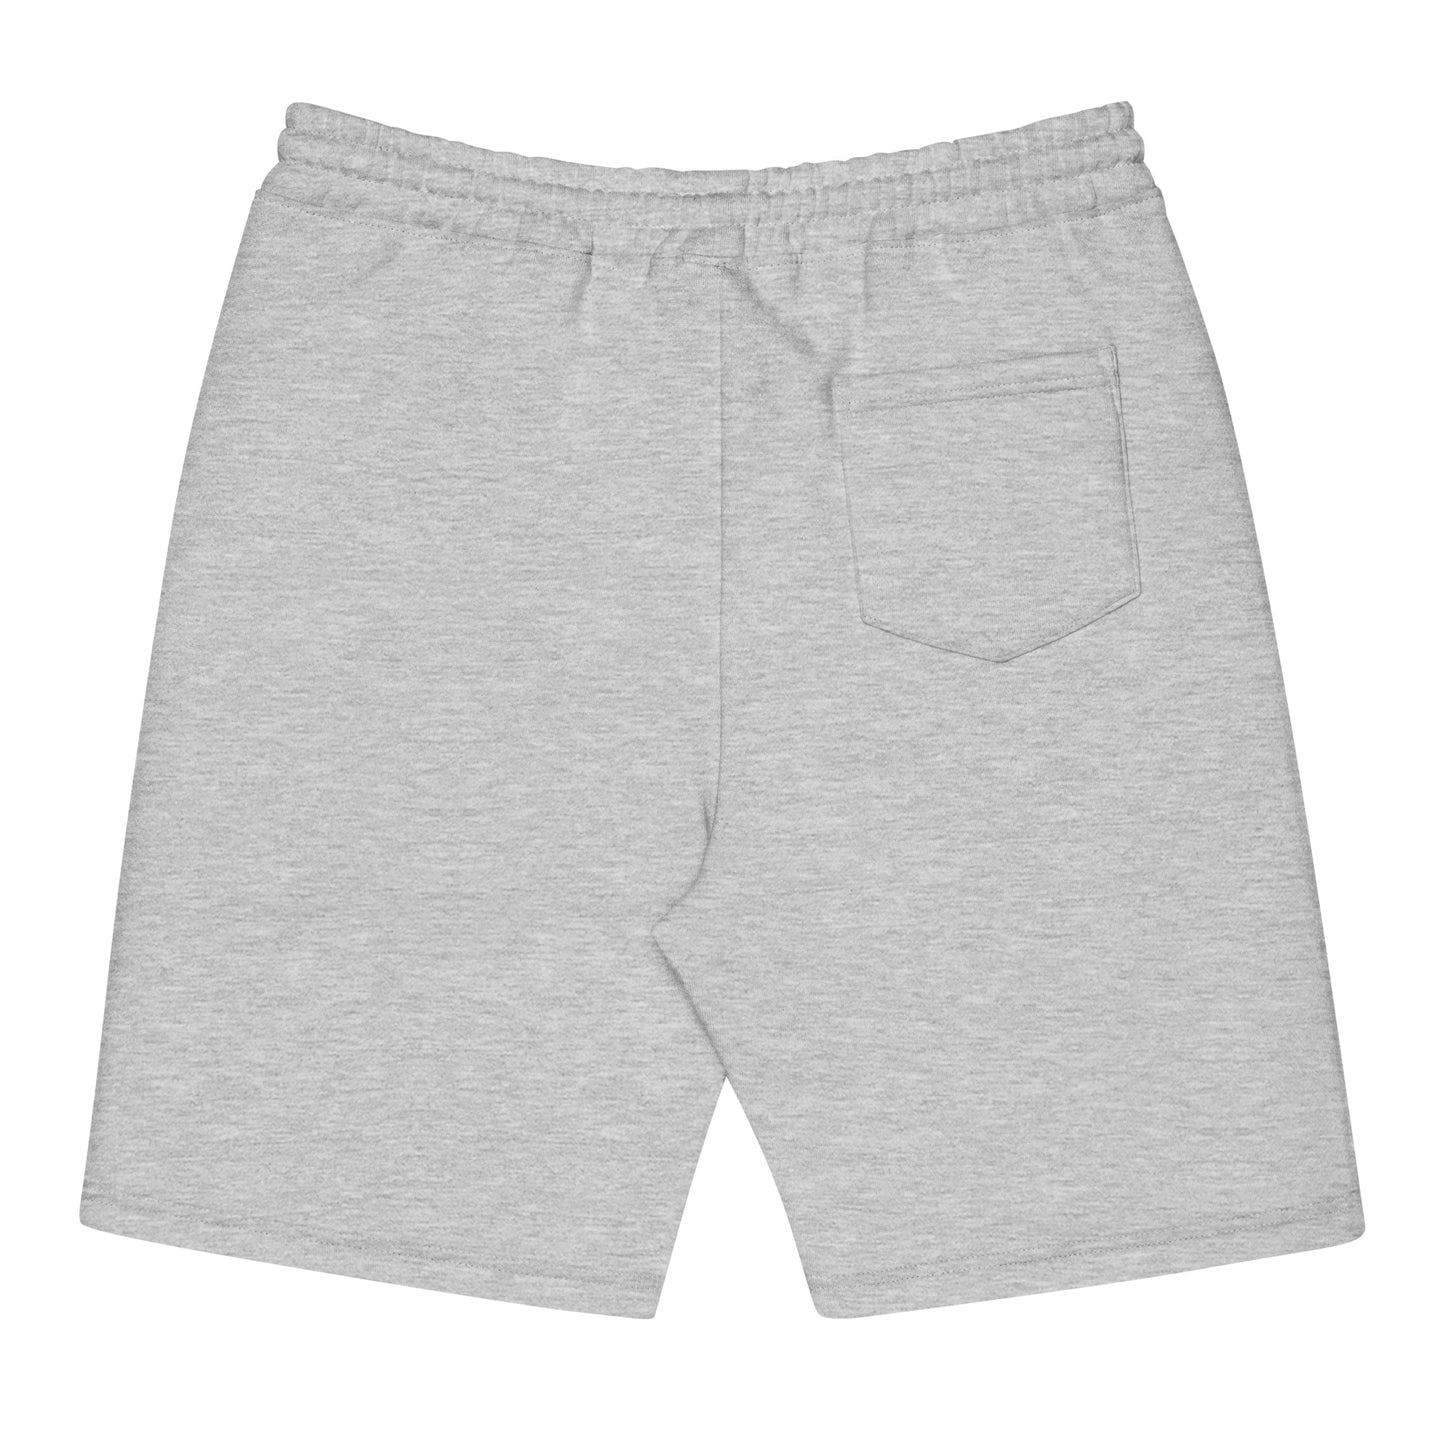 Married to money Men's grey shorts